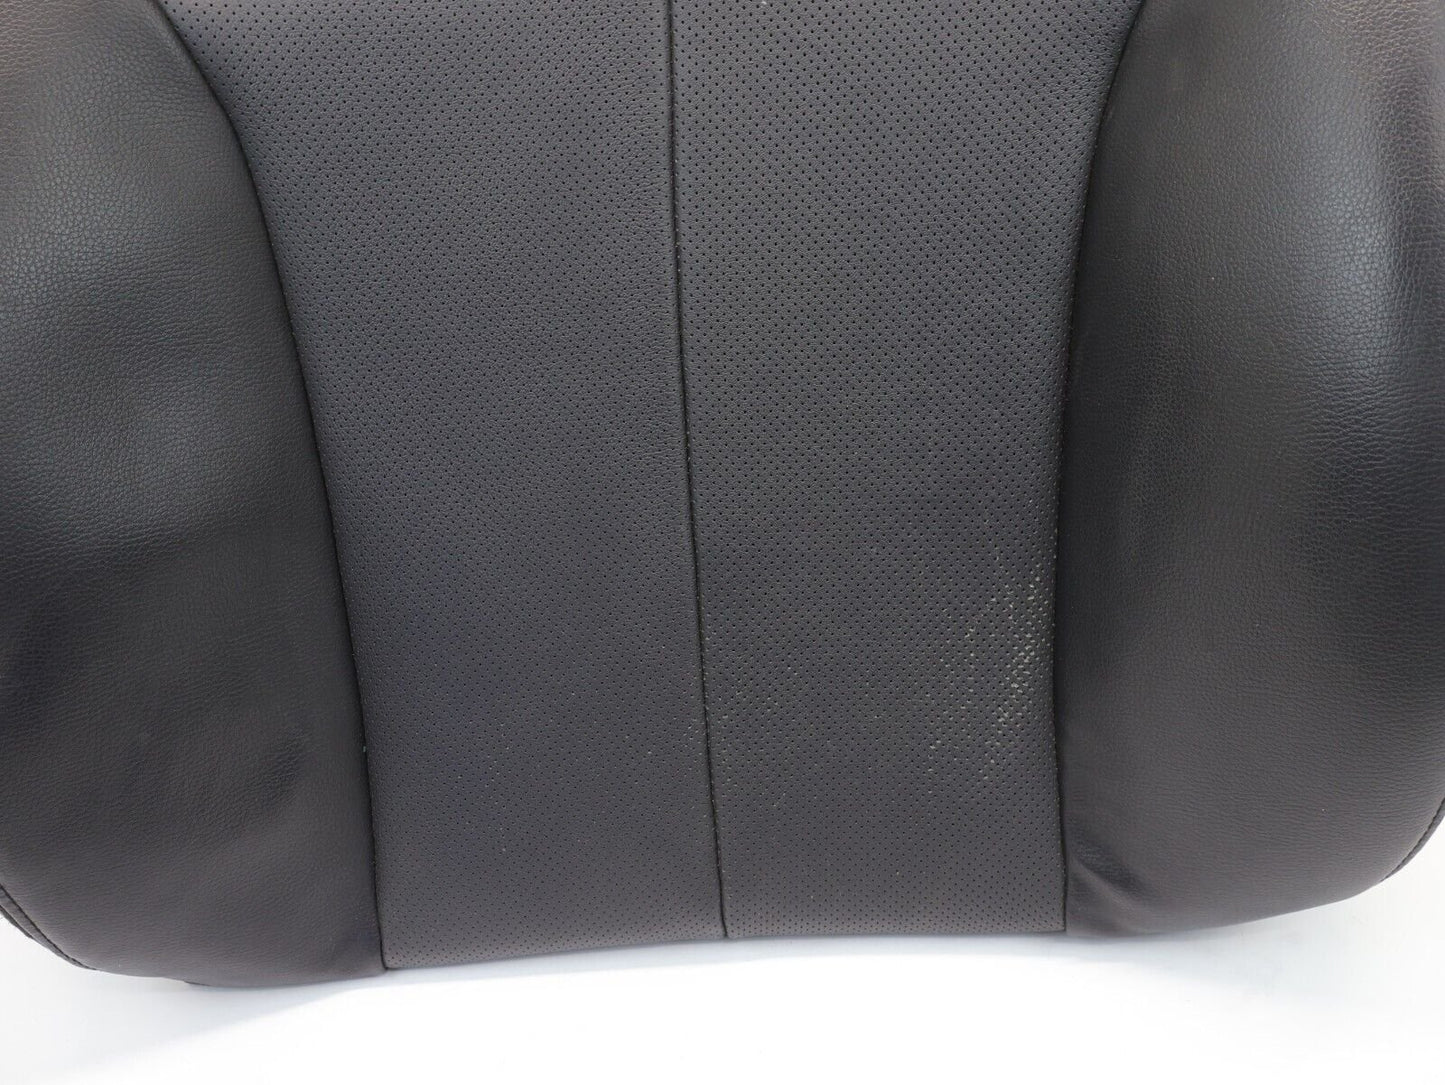 2010-2012 Subaru Outback Front Seat Cover TOP UPPER Leather Skin RH Passenger